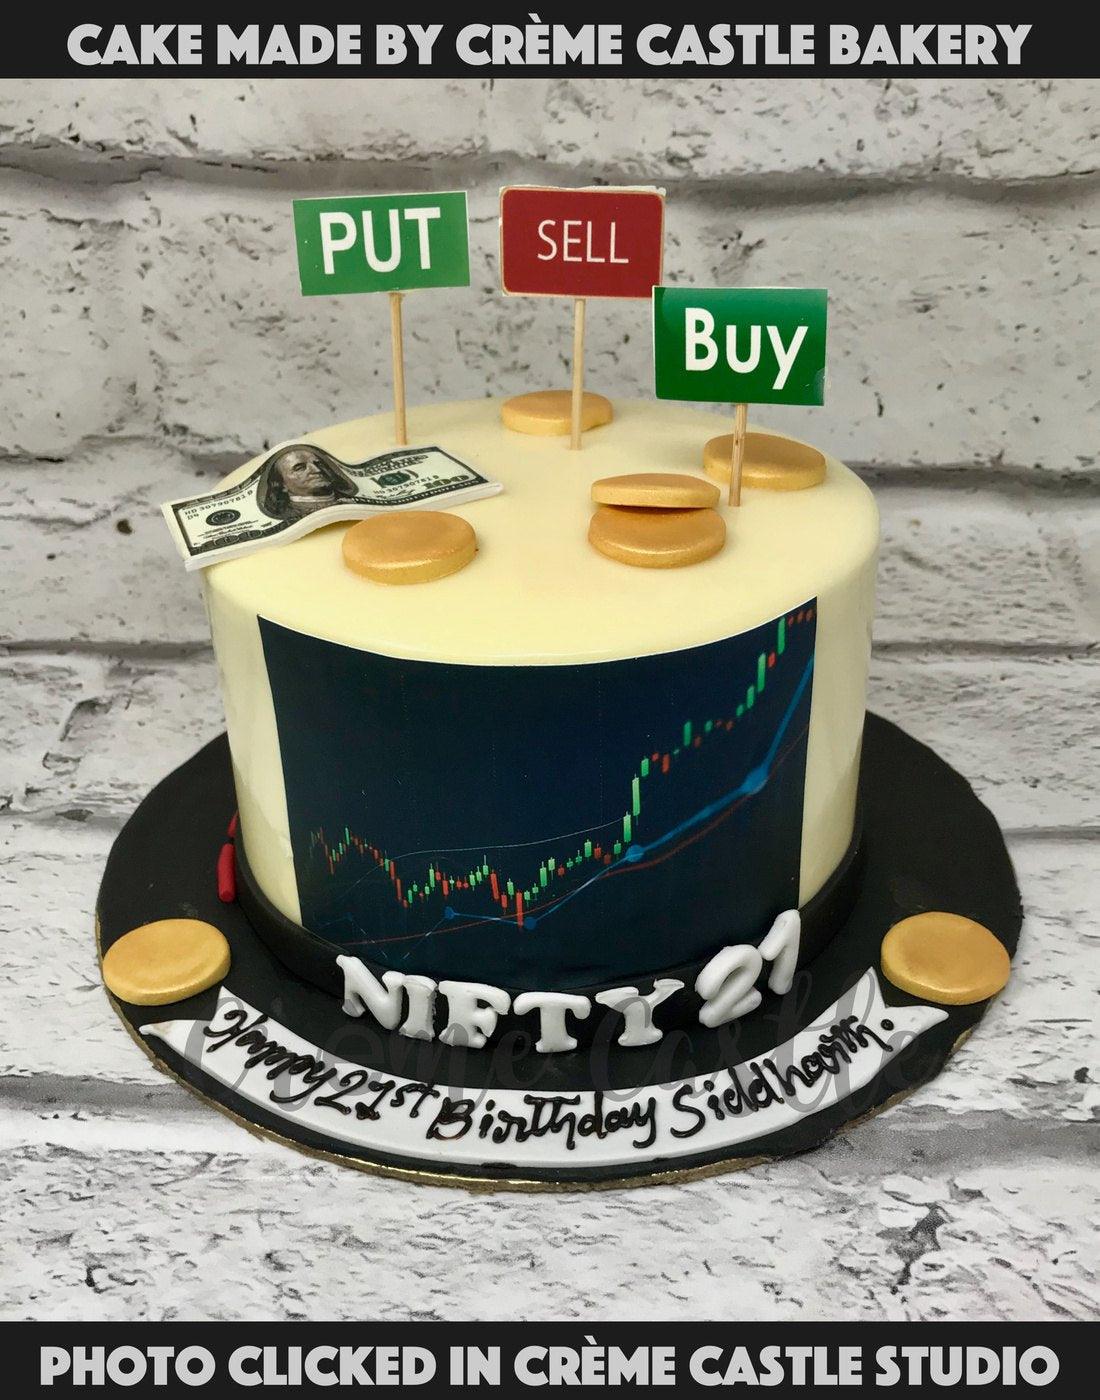 Yellow Cake Stock Forecast: up to 5.555 USD! - YLLXF Stock Price Prediction,  Long-Term & Short-Term Share Revenue Prognosis with Smart Technical Analysis